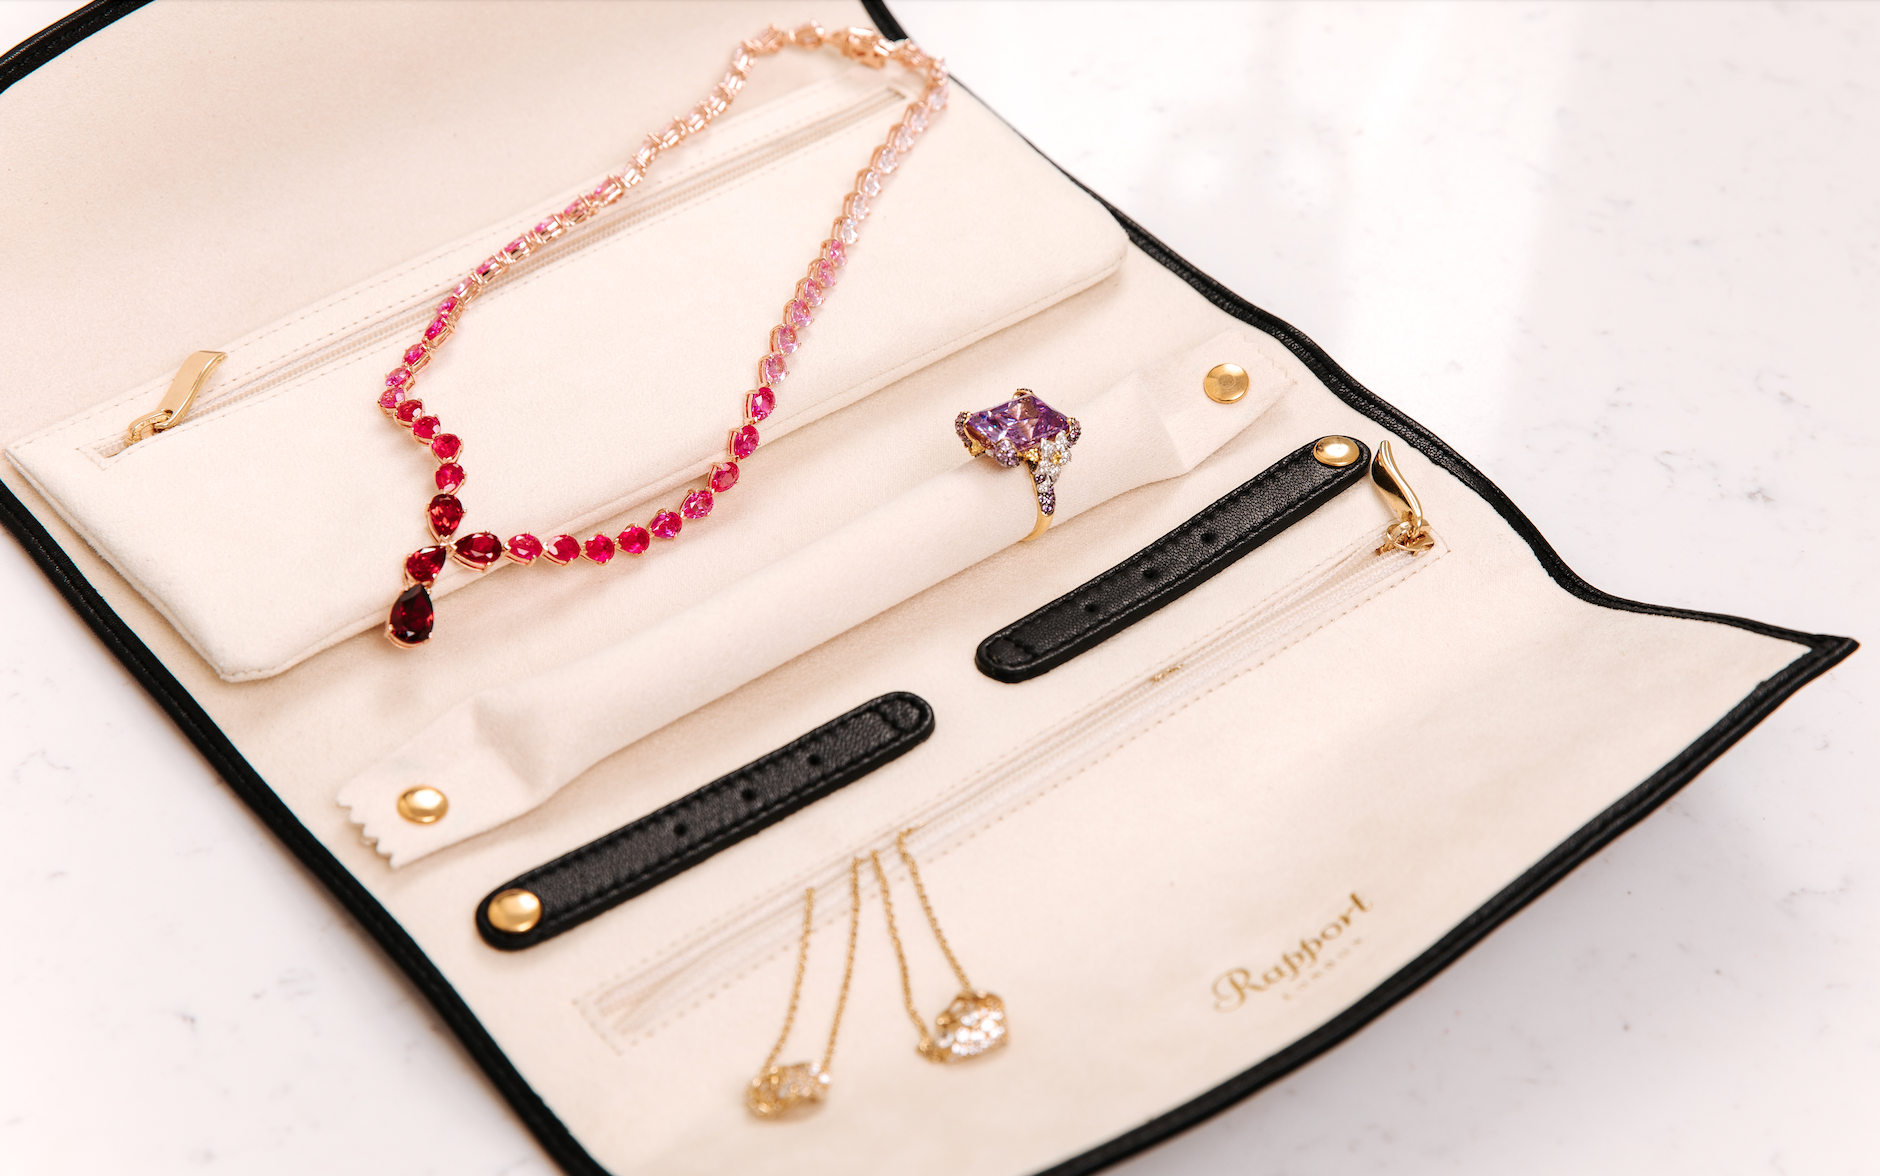 Travel abroad with Rapport’s luxury accessories